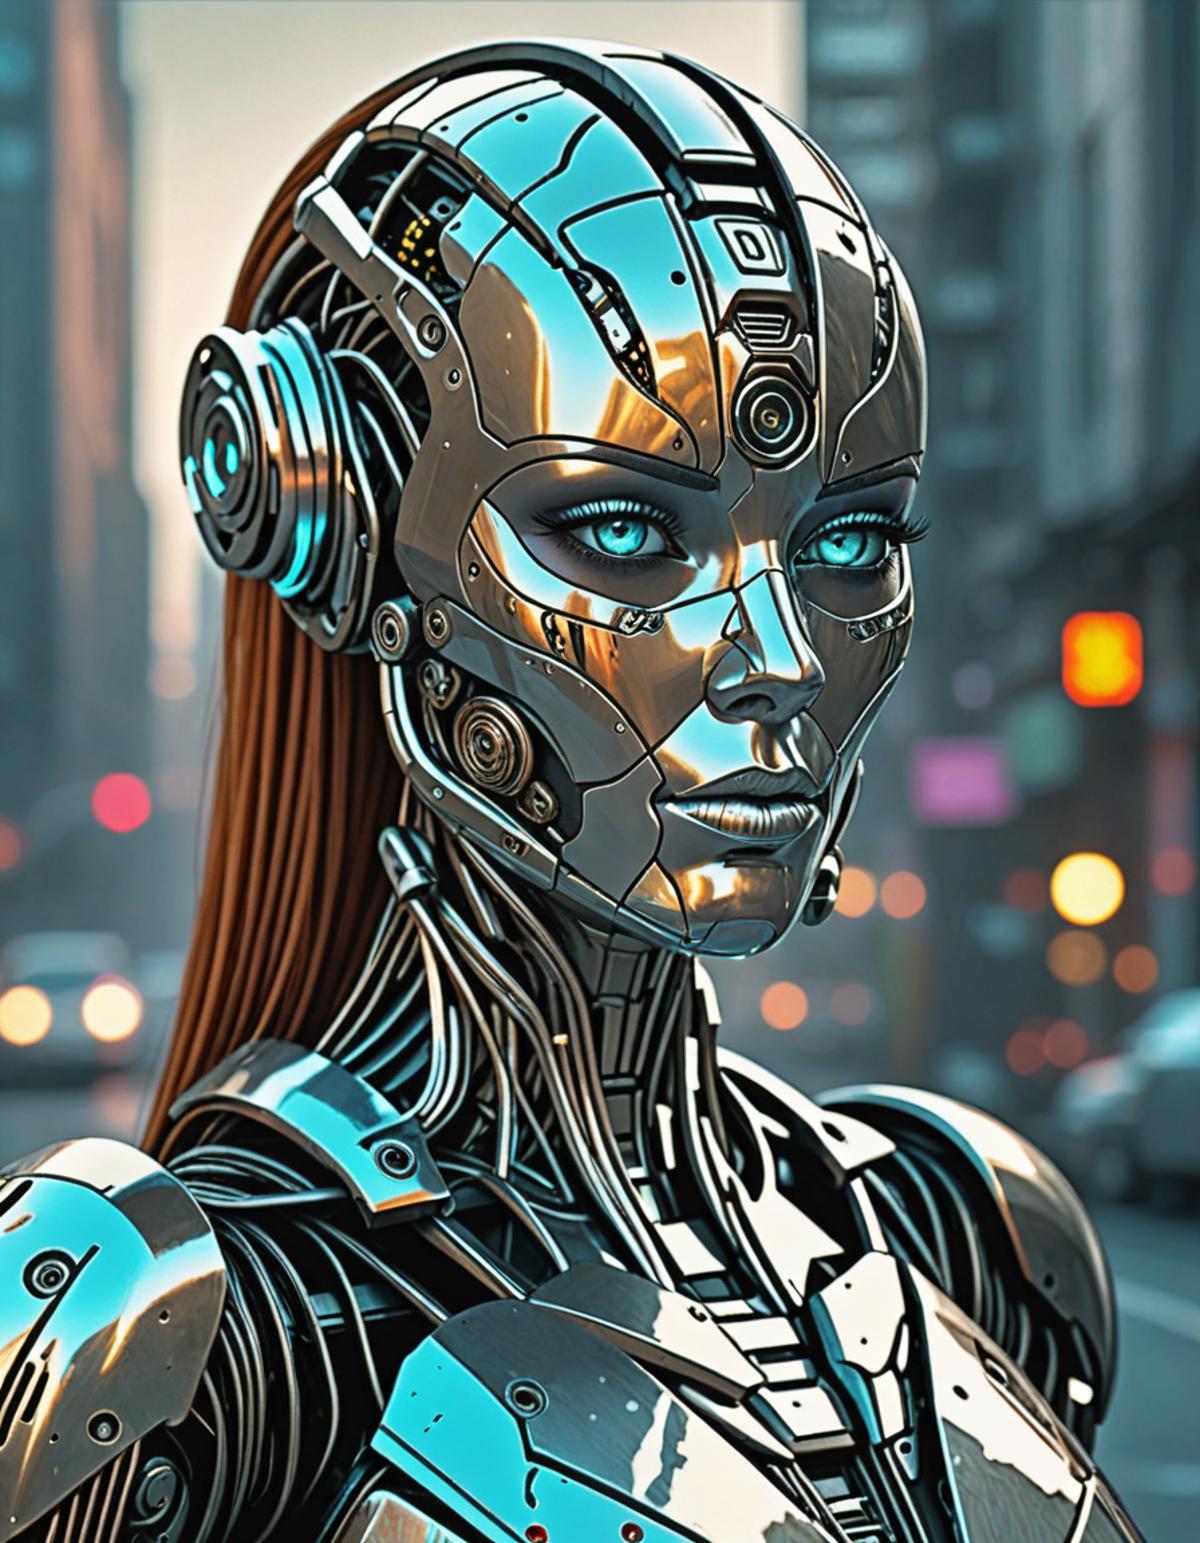 A futuristic robot woman with blue eyes and silver metal plating.